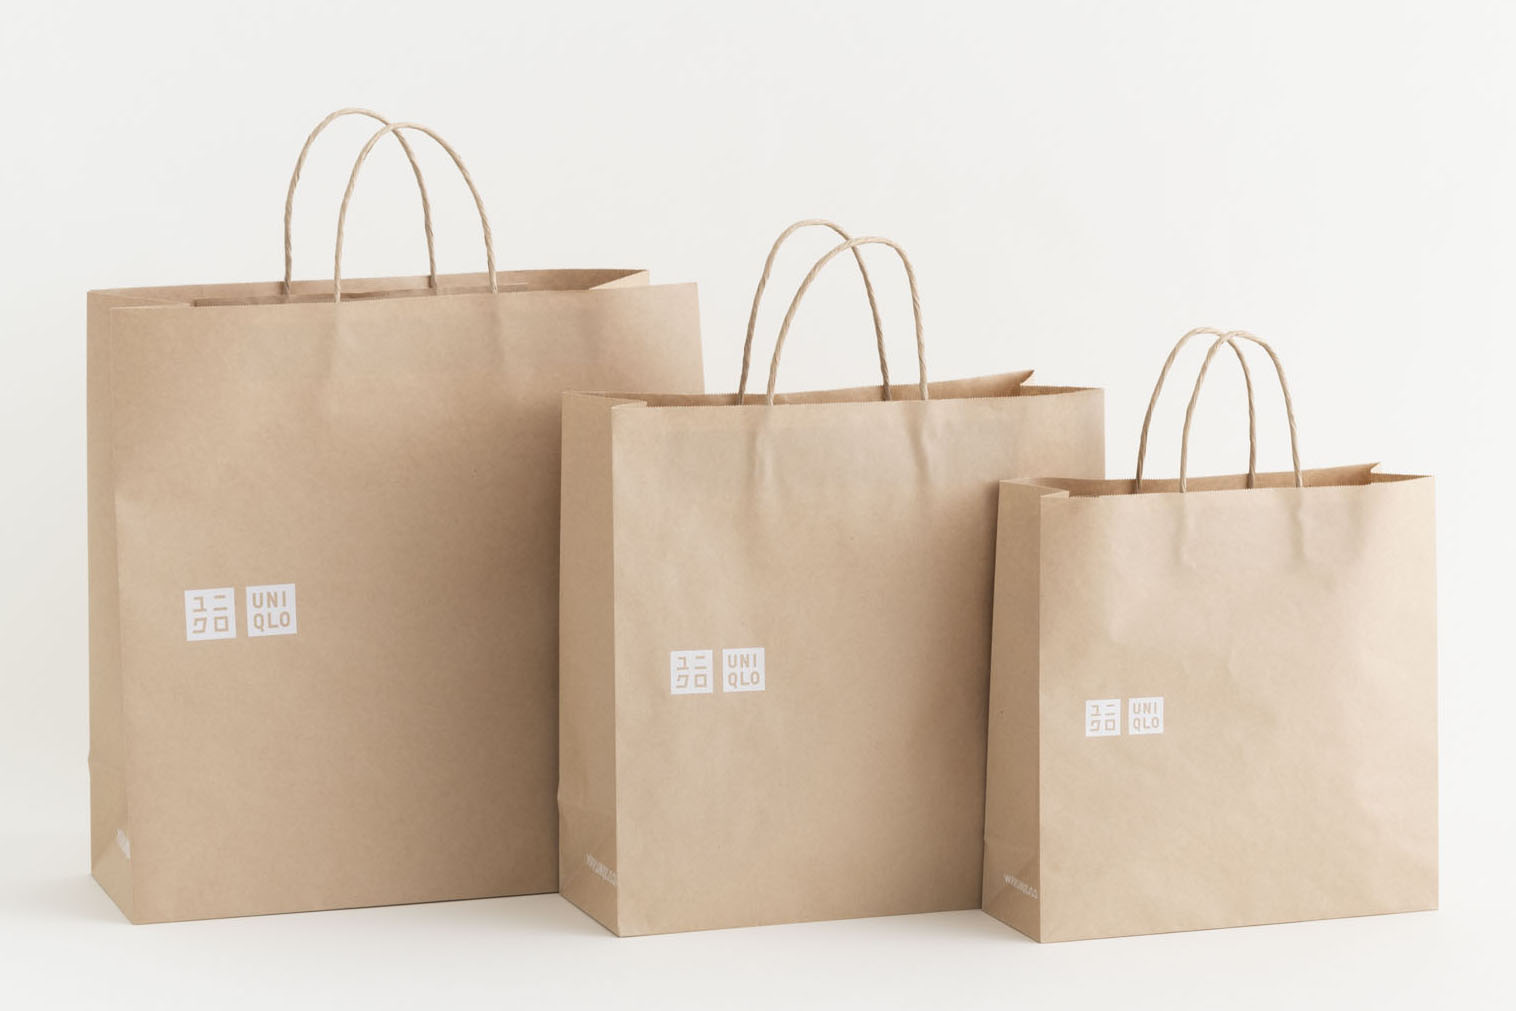 Uniqlo operator to switch from plastic to paper bags worldwide from  September - The Japan Times